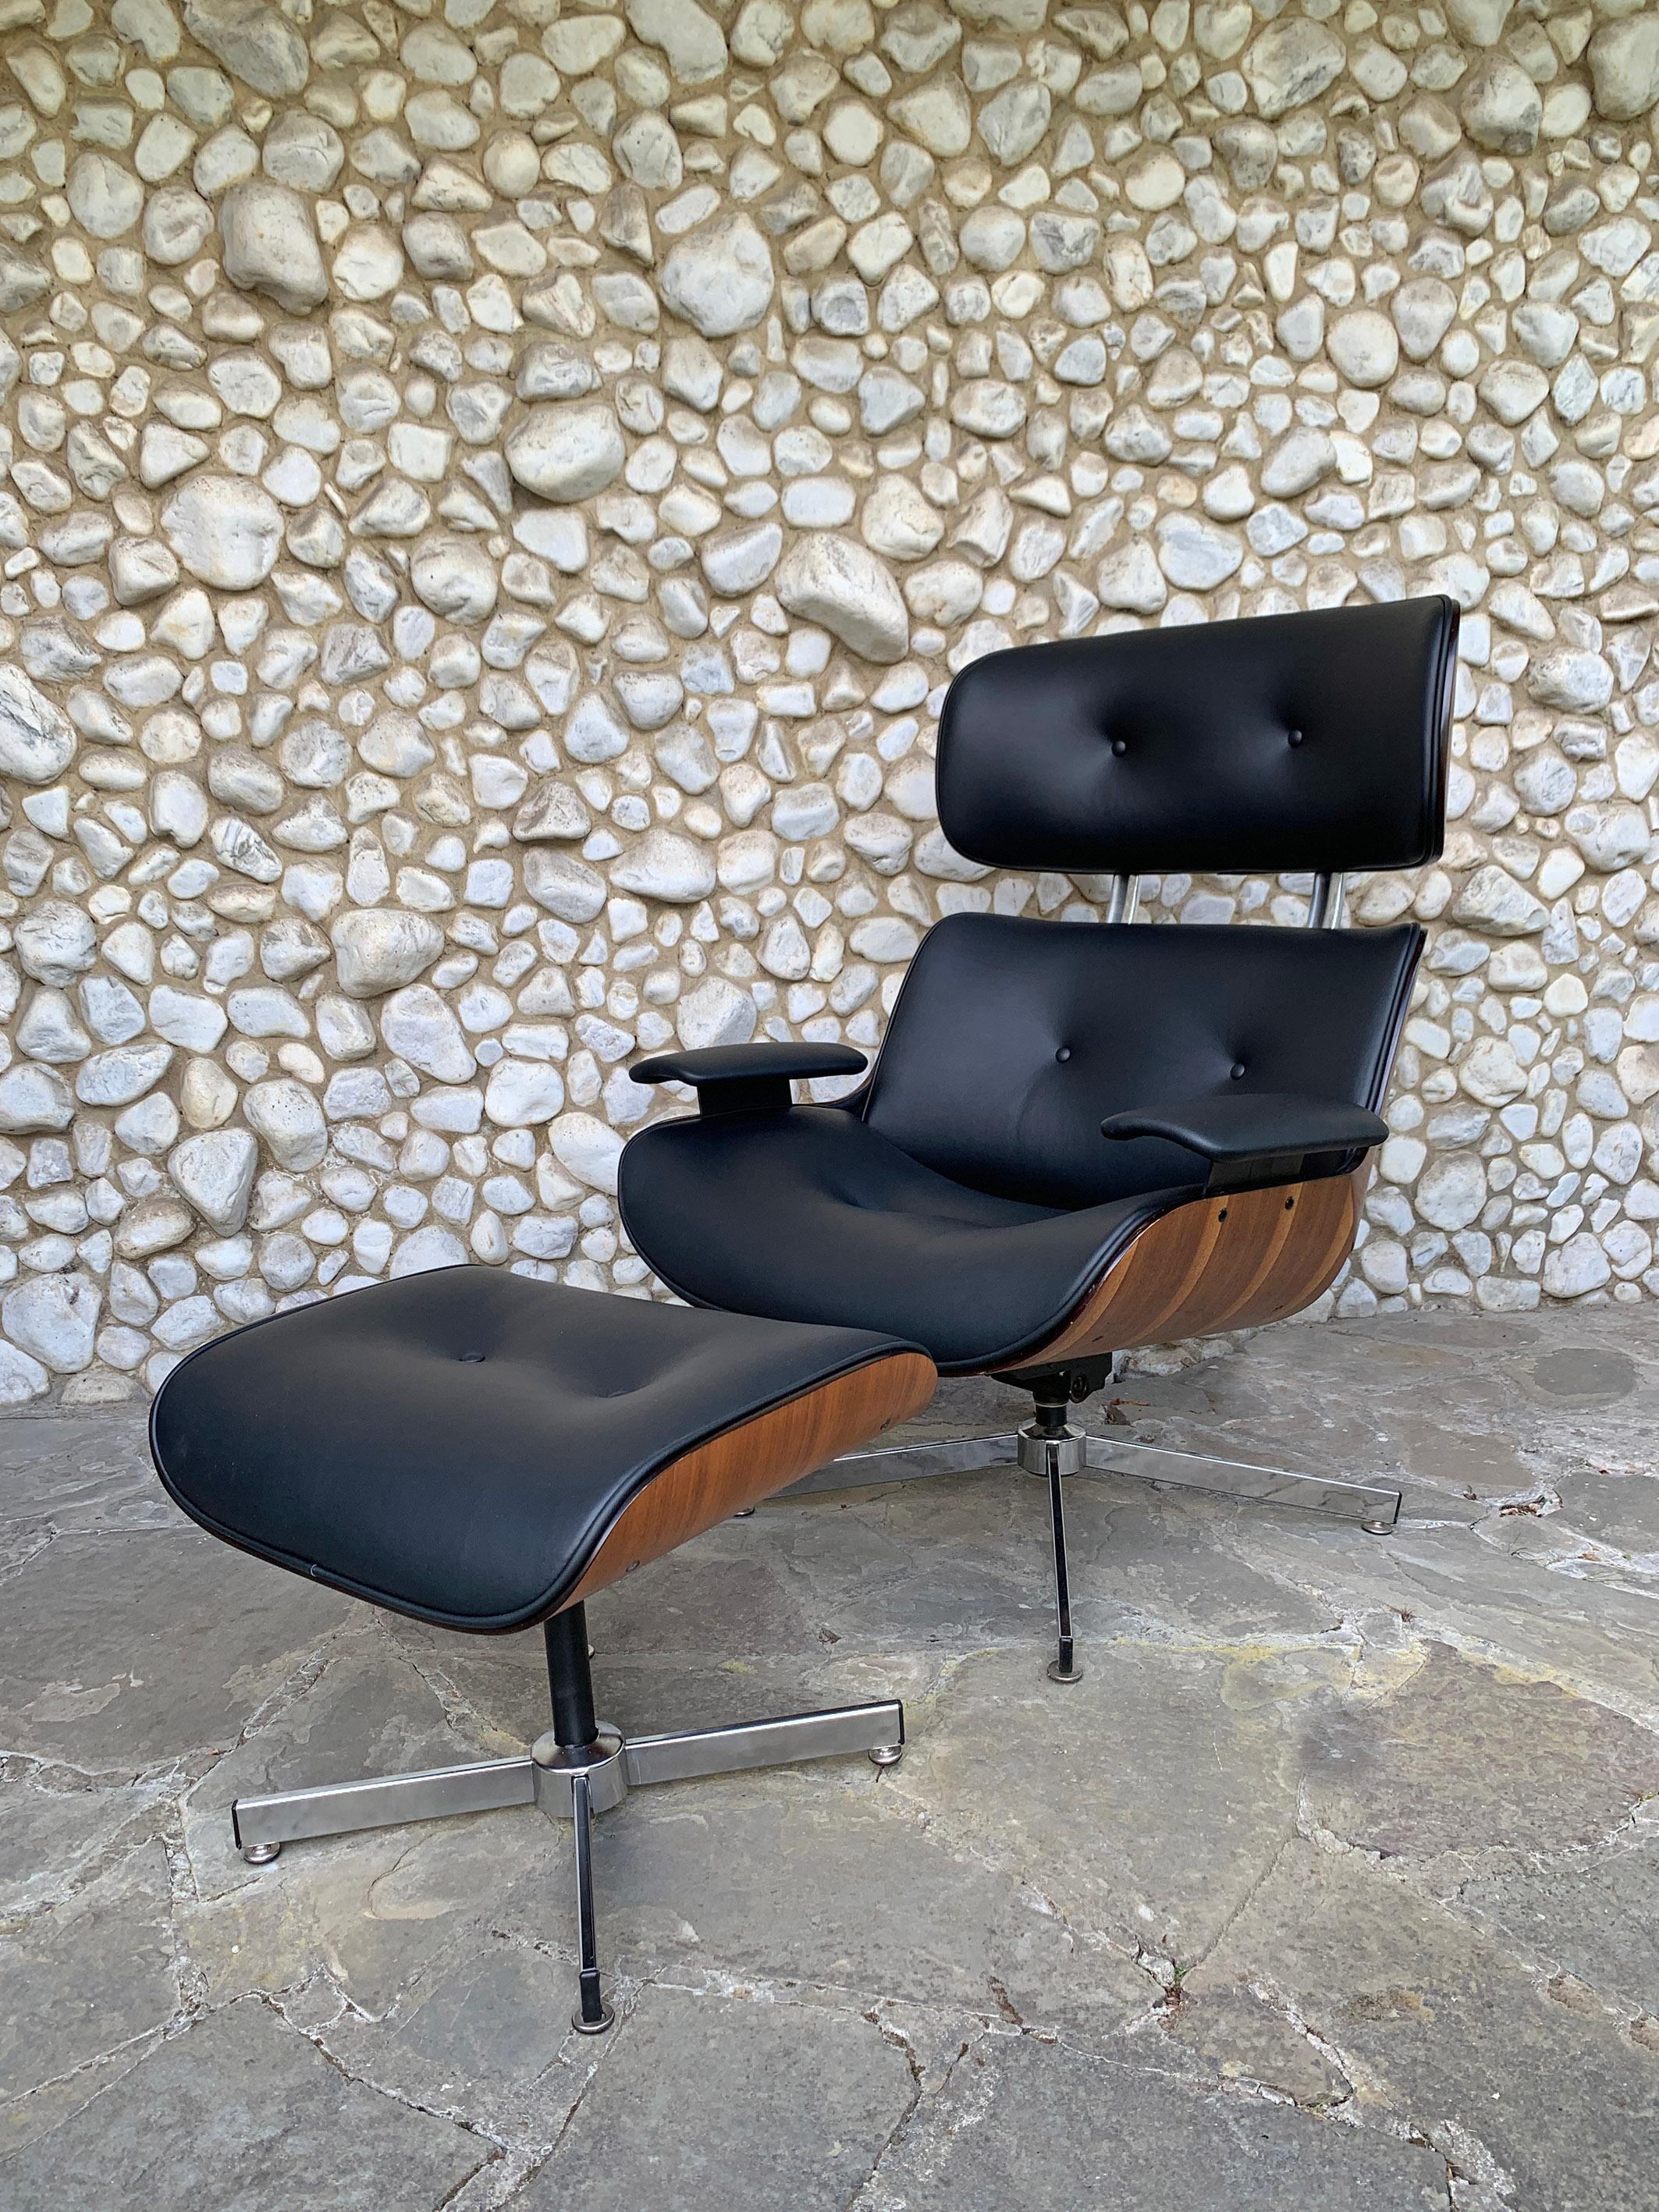 Midcentury Lounge Chair and matching Ottoman by Selig, USA. Inspired by the Eames 670 Lounge Chair.

Restored, new upholstery with high-quality Swiss leather, the plywood shells have been refinished.

The Lounge chair is equipped with a tilt and